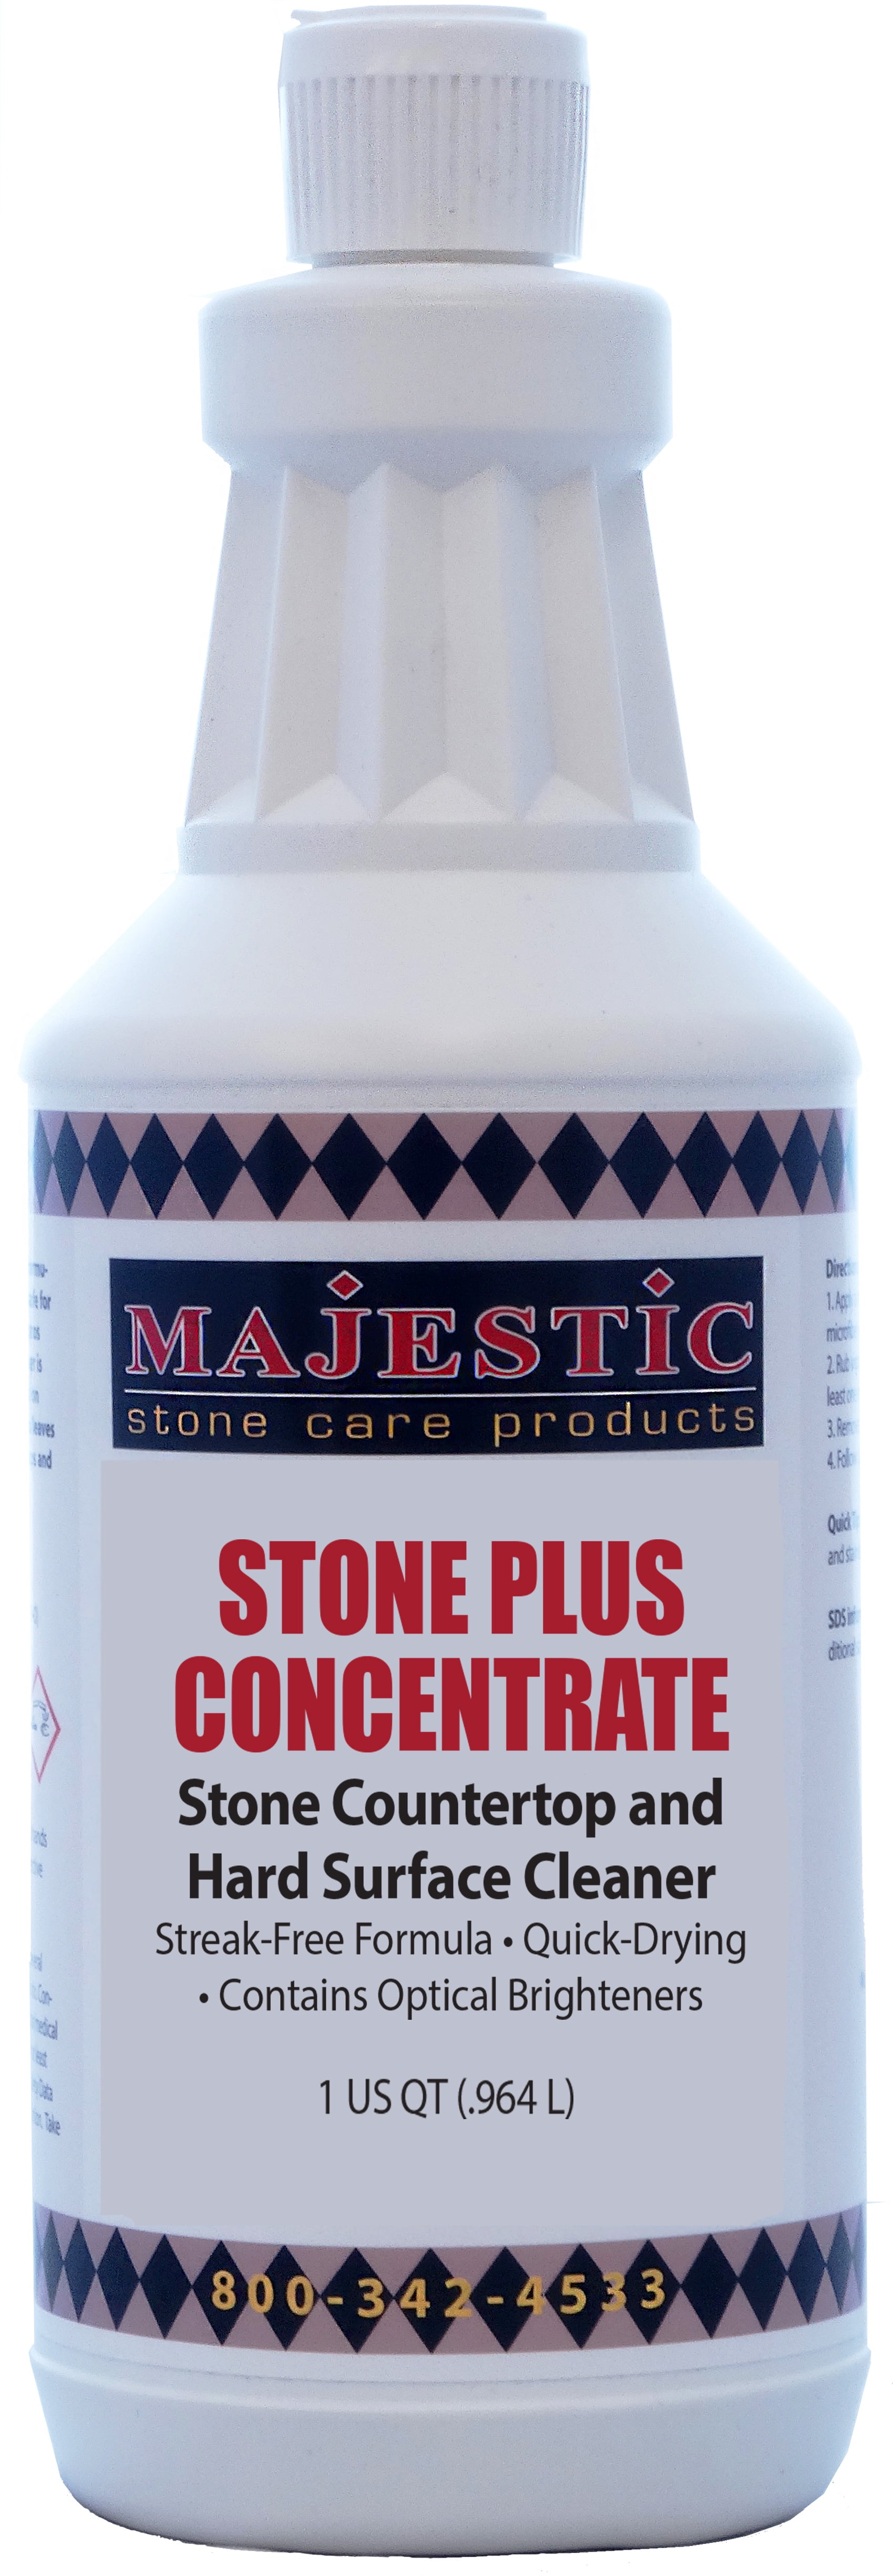 Majestic Stone Plus Concentrate Quart. : Marble, Granite and Natural ...